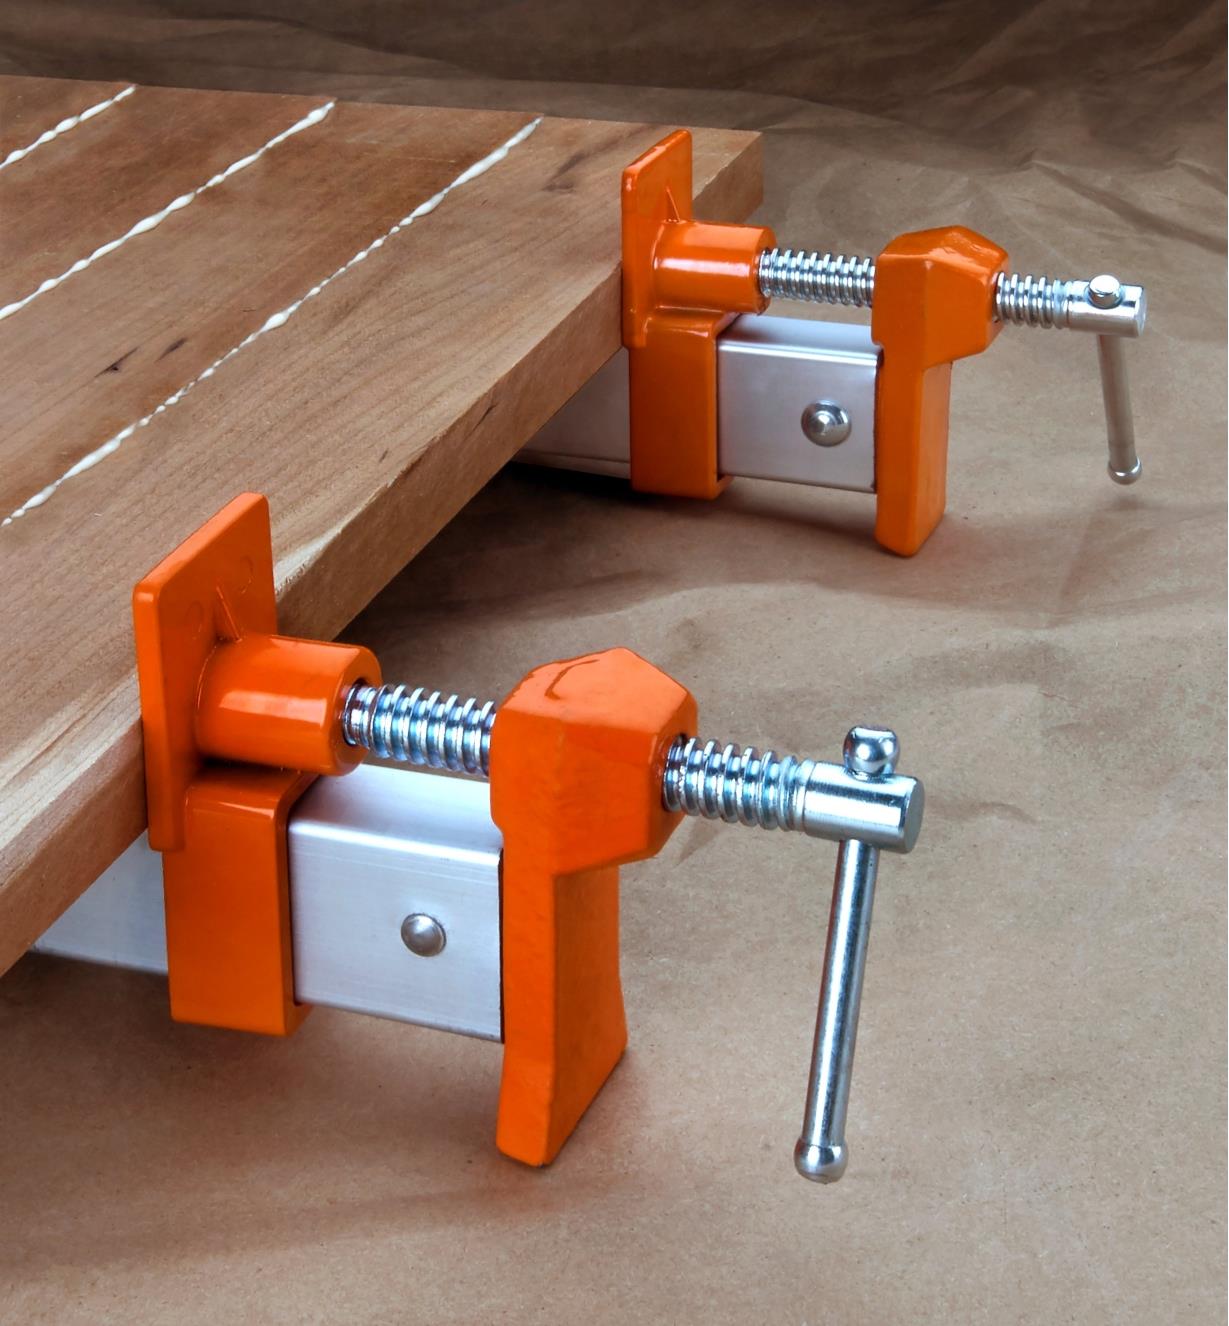 Two Jorgensen aluminum bar clamps holding a panel glue-up together while the glue sets